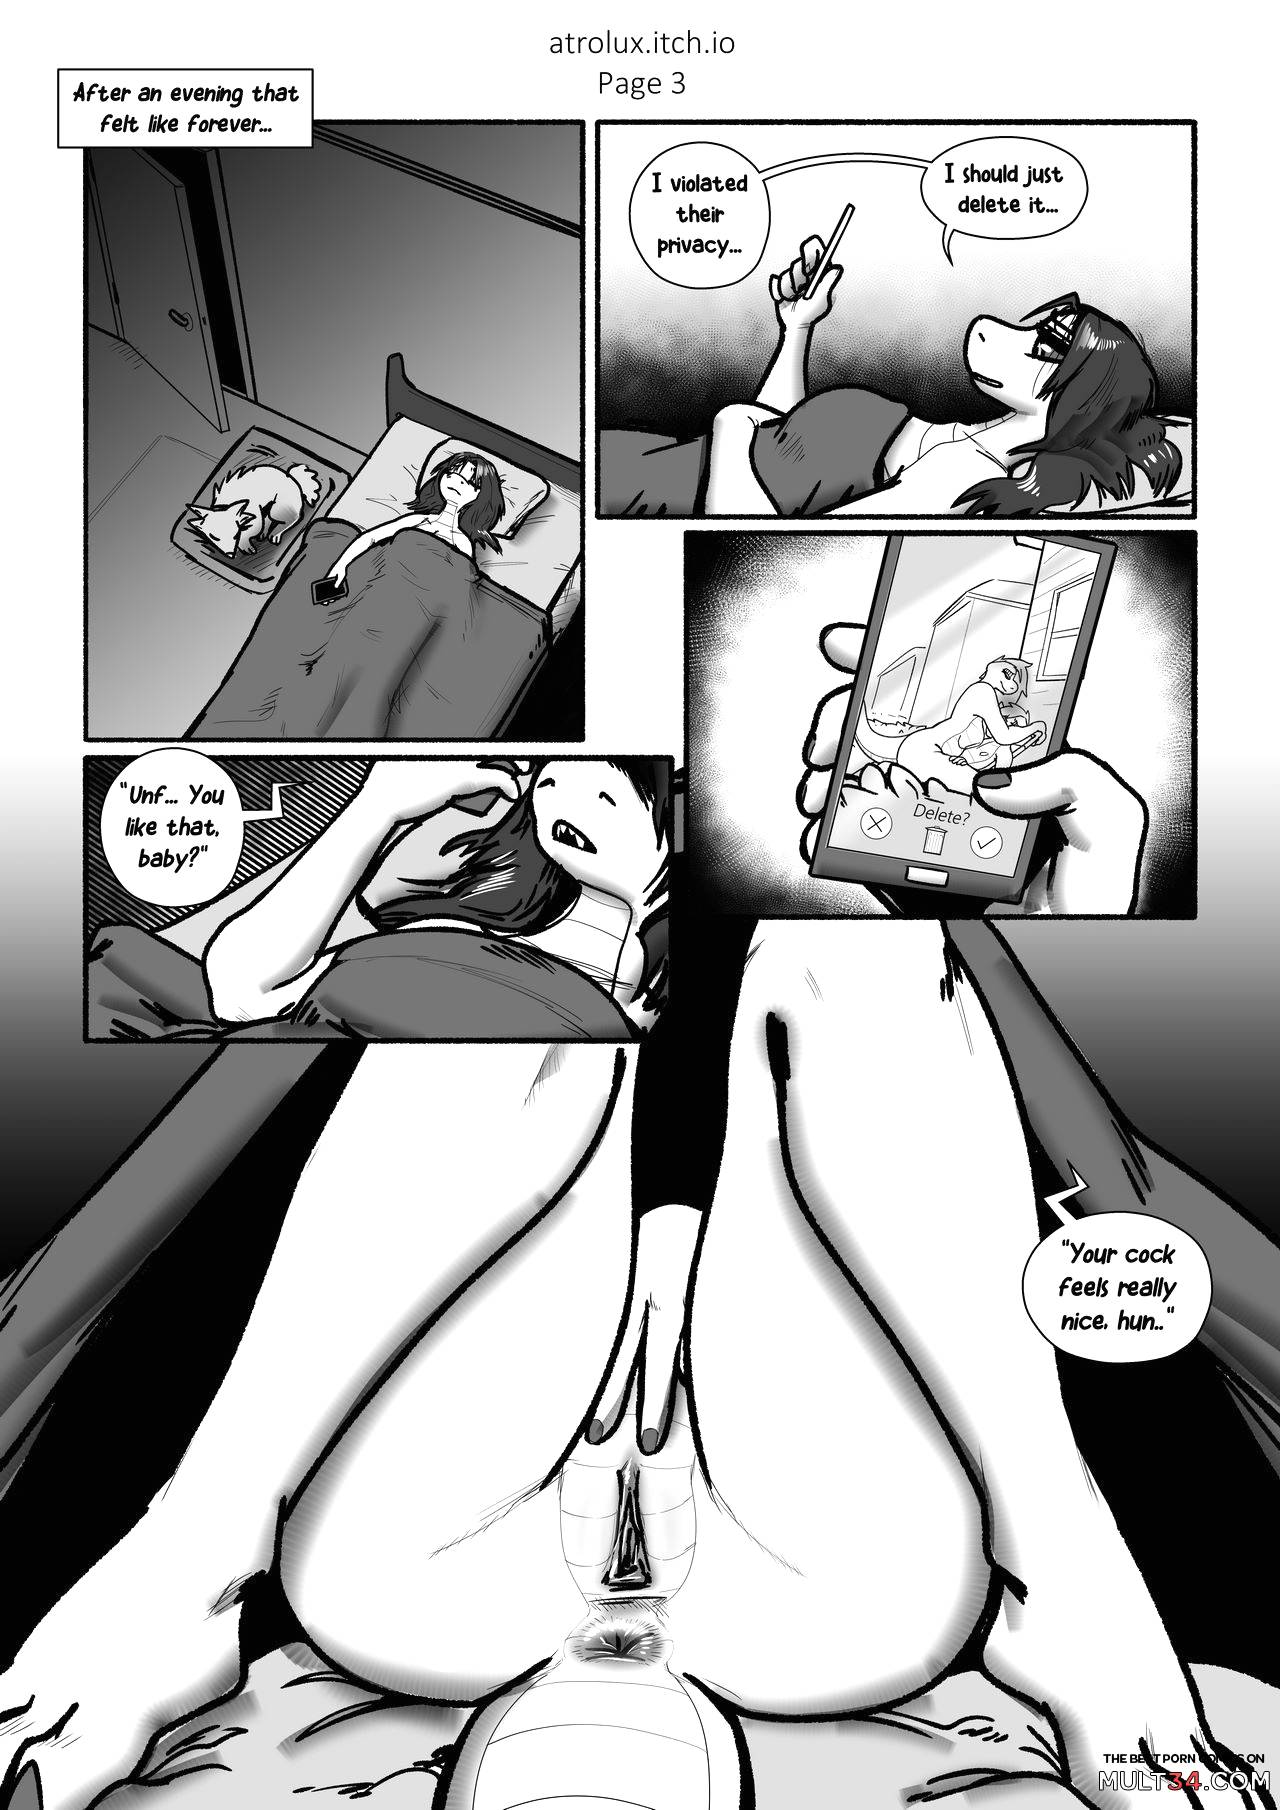 Shedding Inhibitions 6 - Feigned Innocence page 6